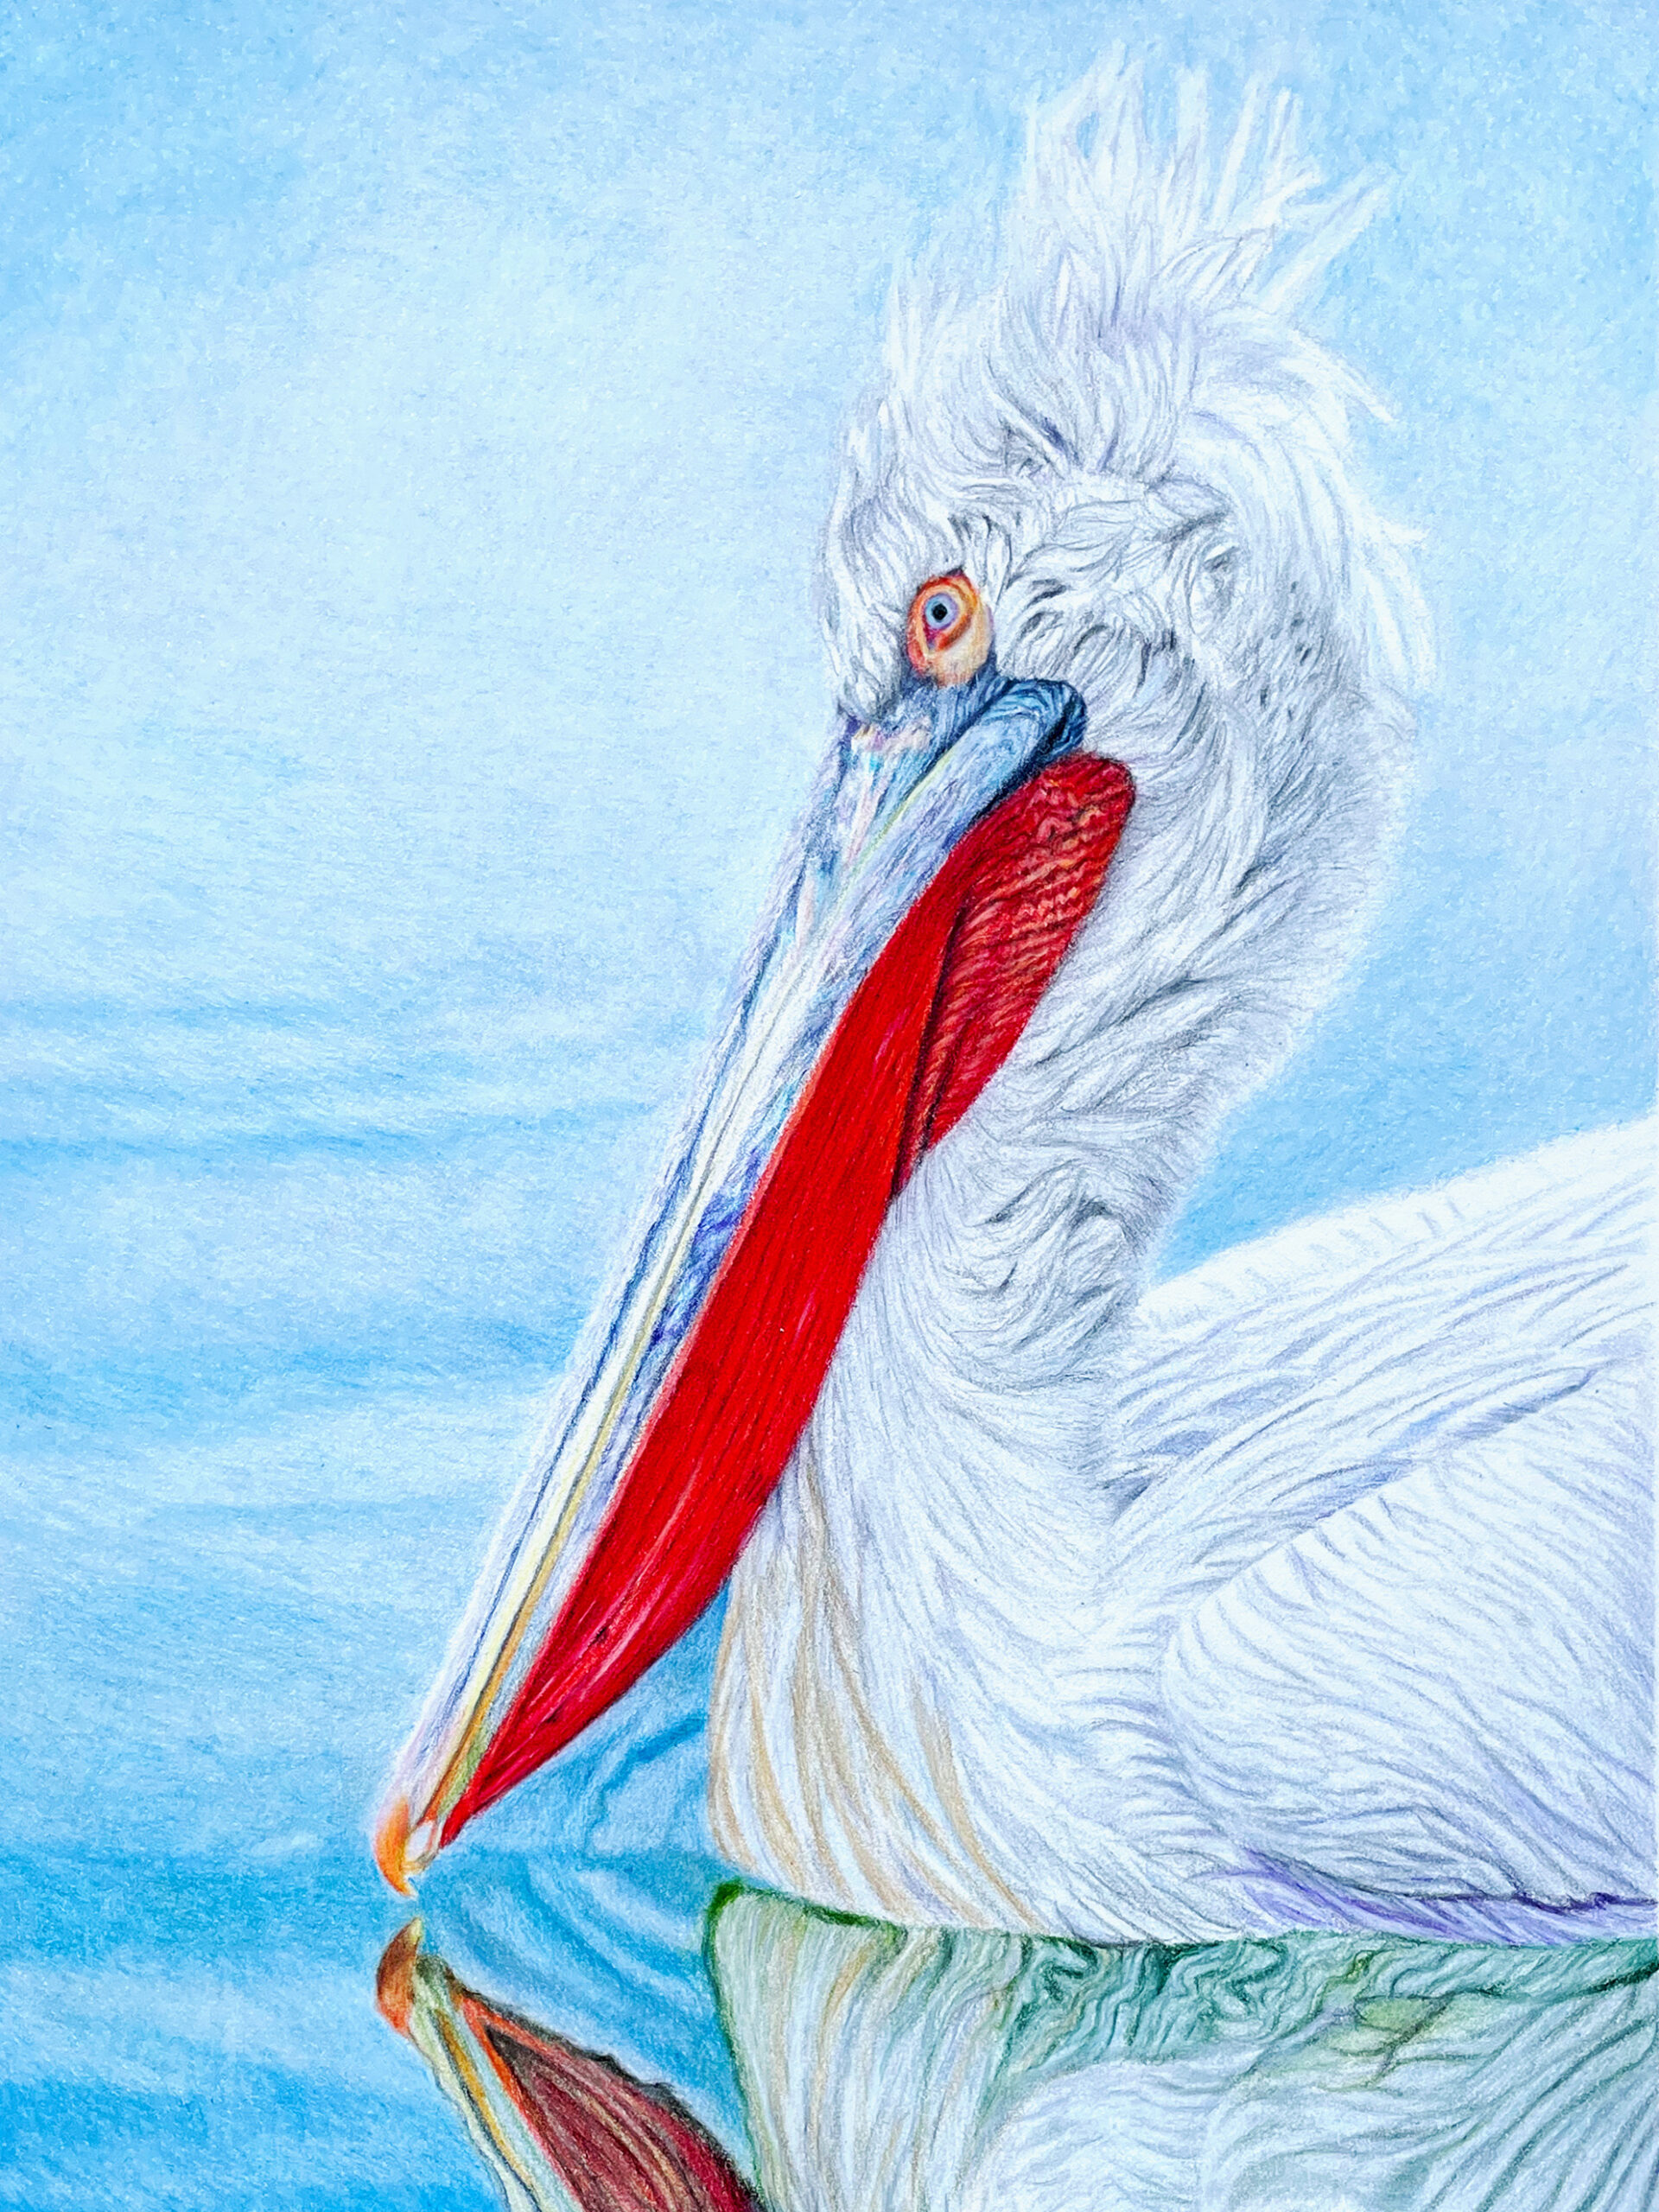 Colored pencil drawing of a Pelican on the water drawn by Jes Dickerson